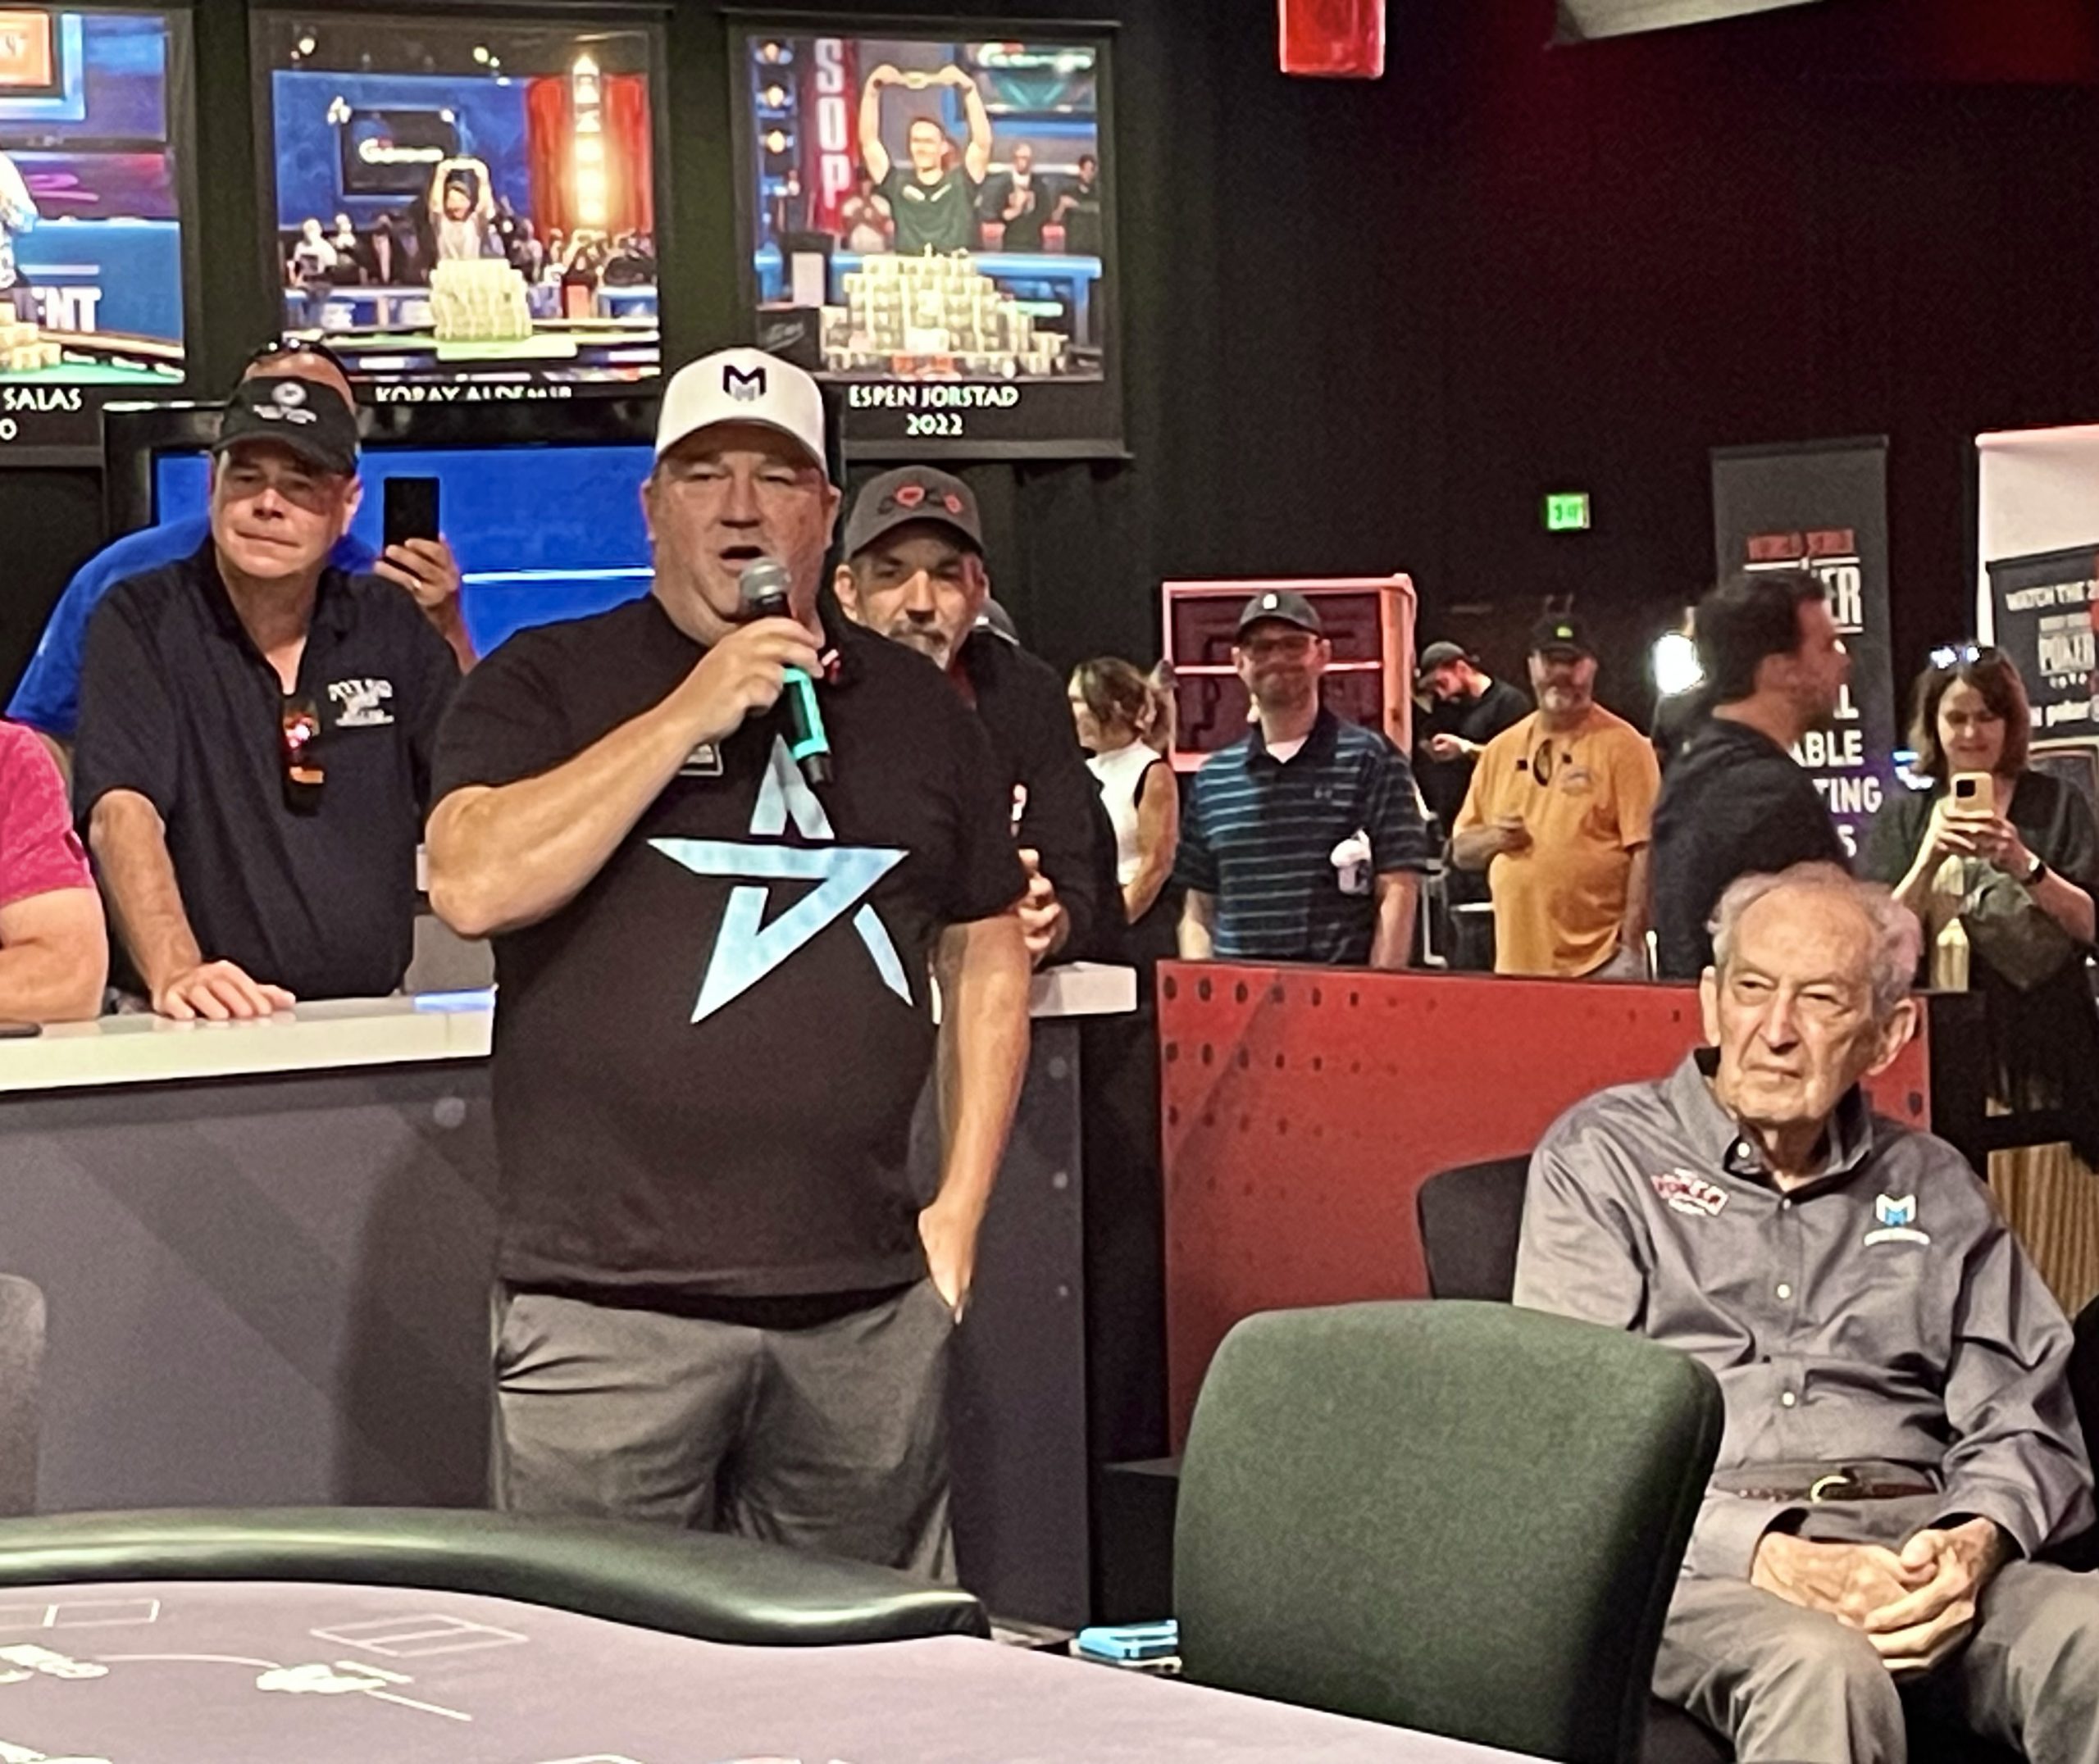 2023 WSOP Main Event Day 1D: Chris Moneymaker delivers heartfelt speech, Phil Hellmuth, Dan Cates roar; past record breached; 18 champions into Day 2